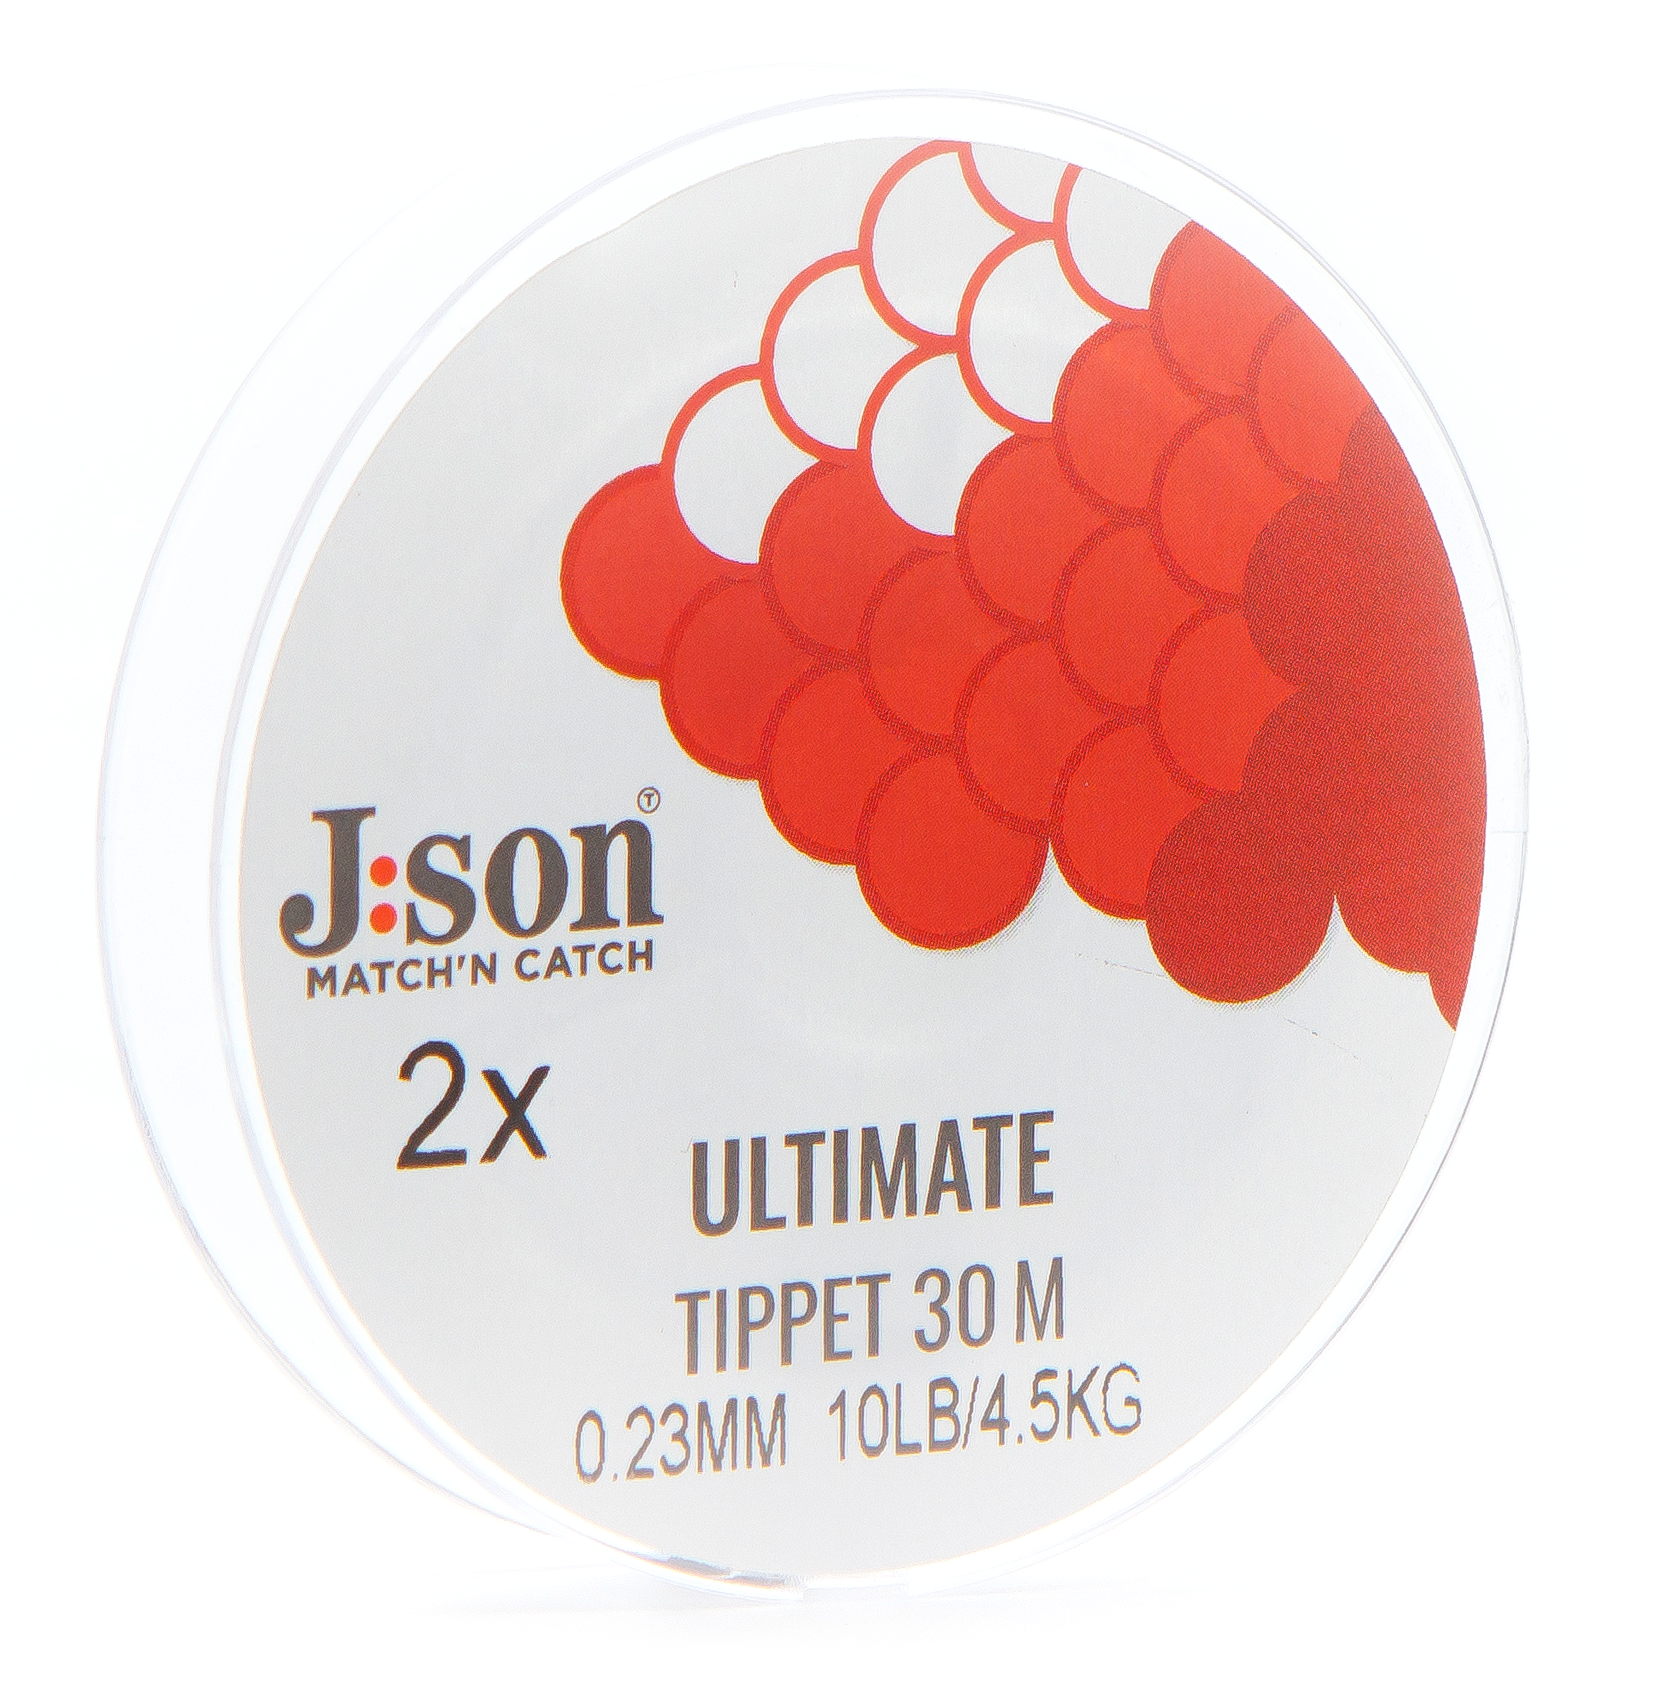 Json Ultimate Tippet 30 m 6X 0.13mm